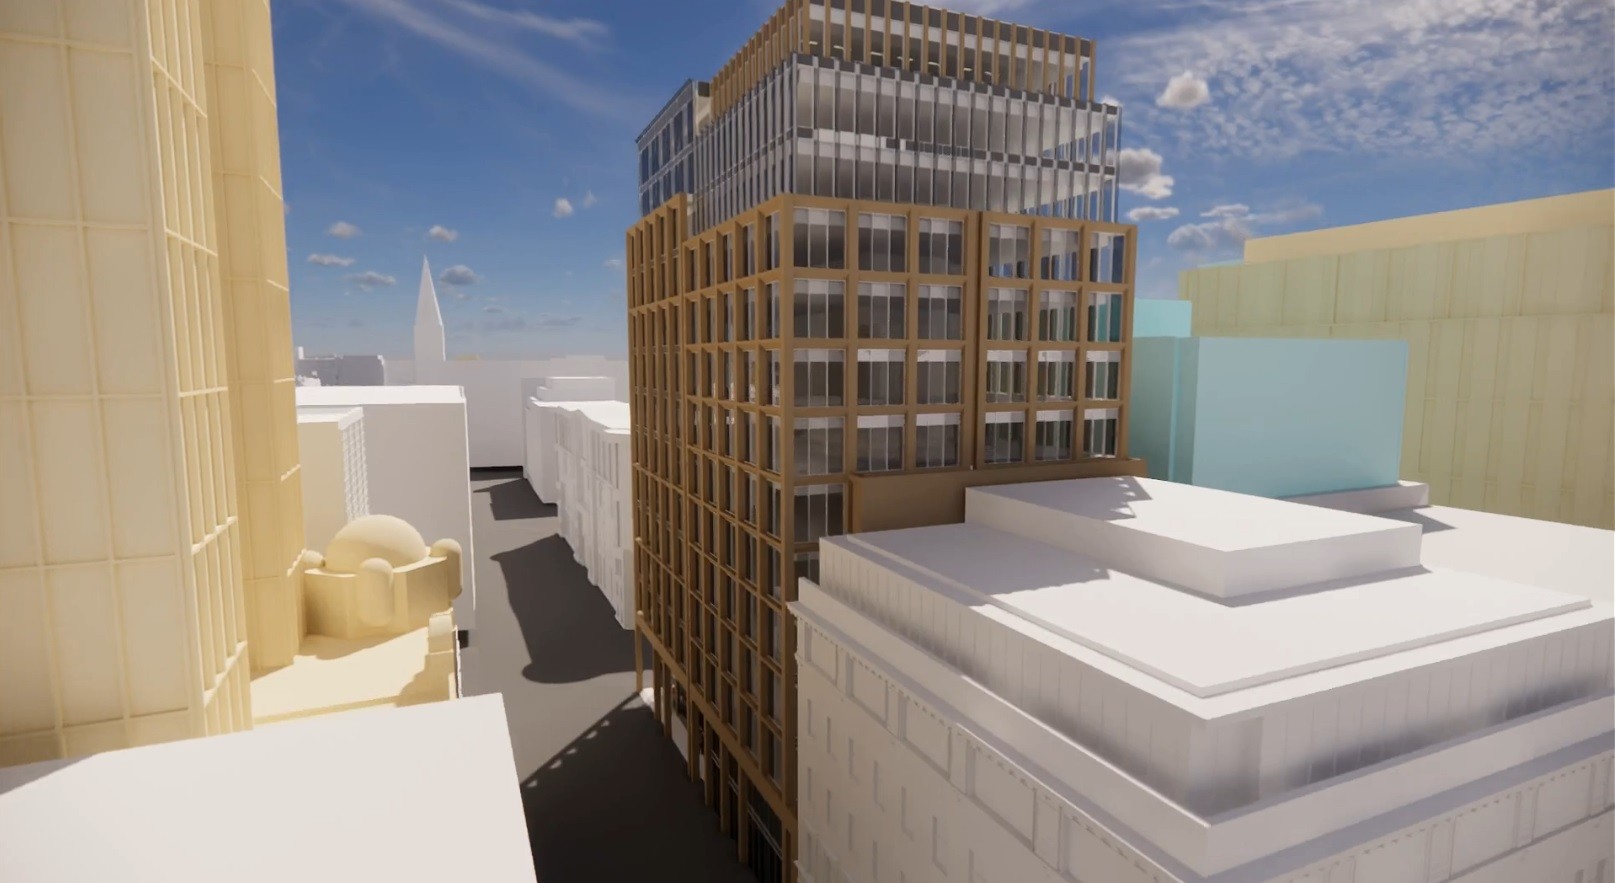 Office block plans fleshed out for site of Glasgow's Princes House